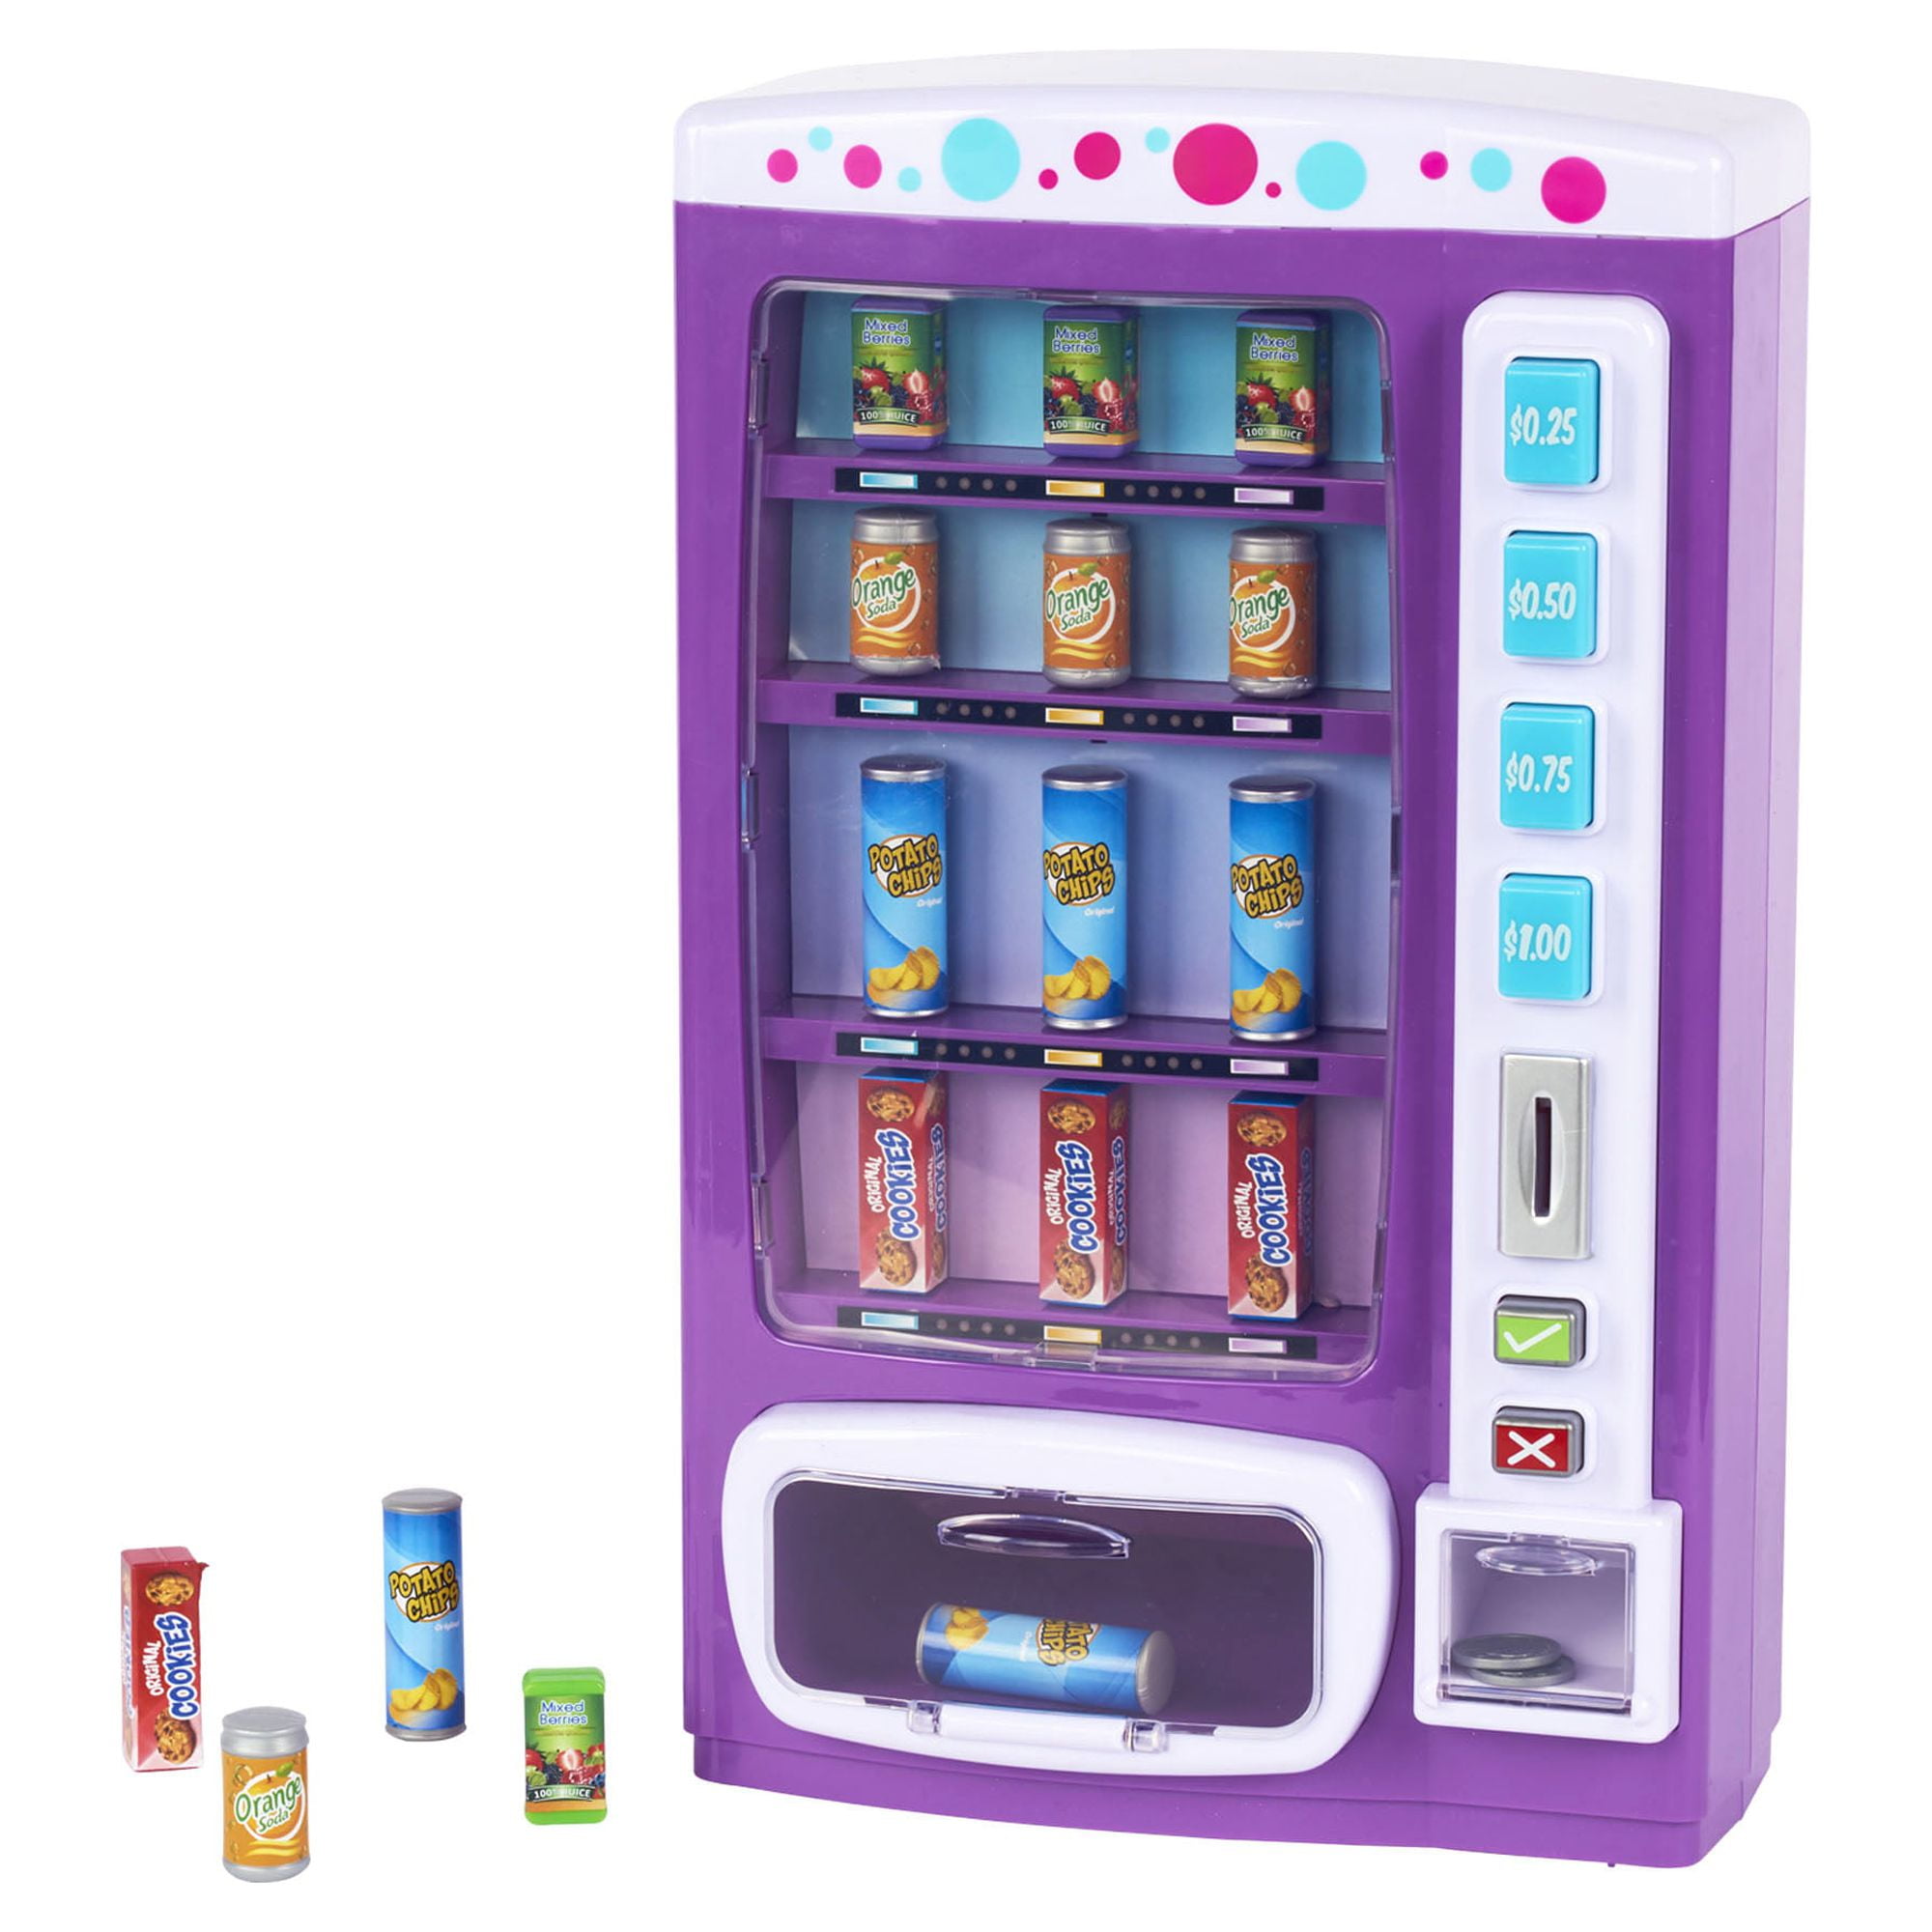 There's Now a Mini Vending Machine You Can Get For Your Desk